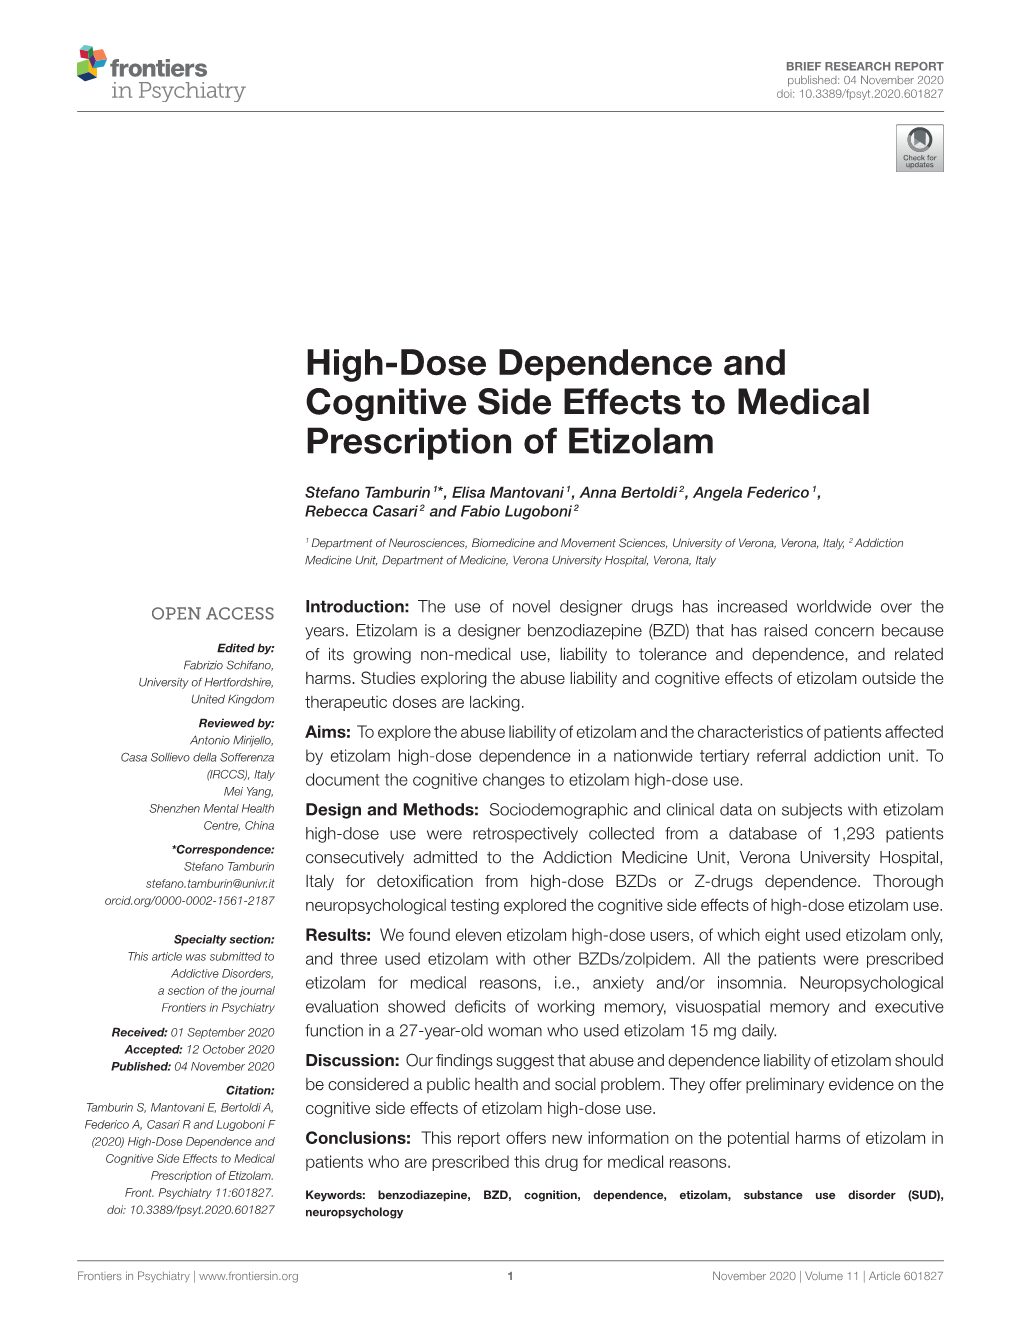 High-Dose Dependence and Cognitive Side Effects to Medical Prescription of Etizolam